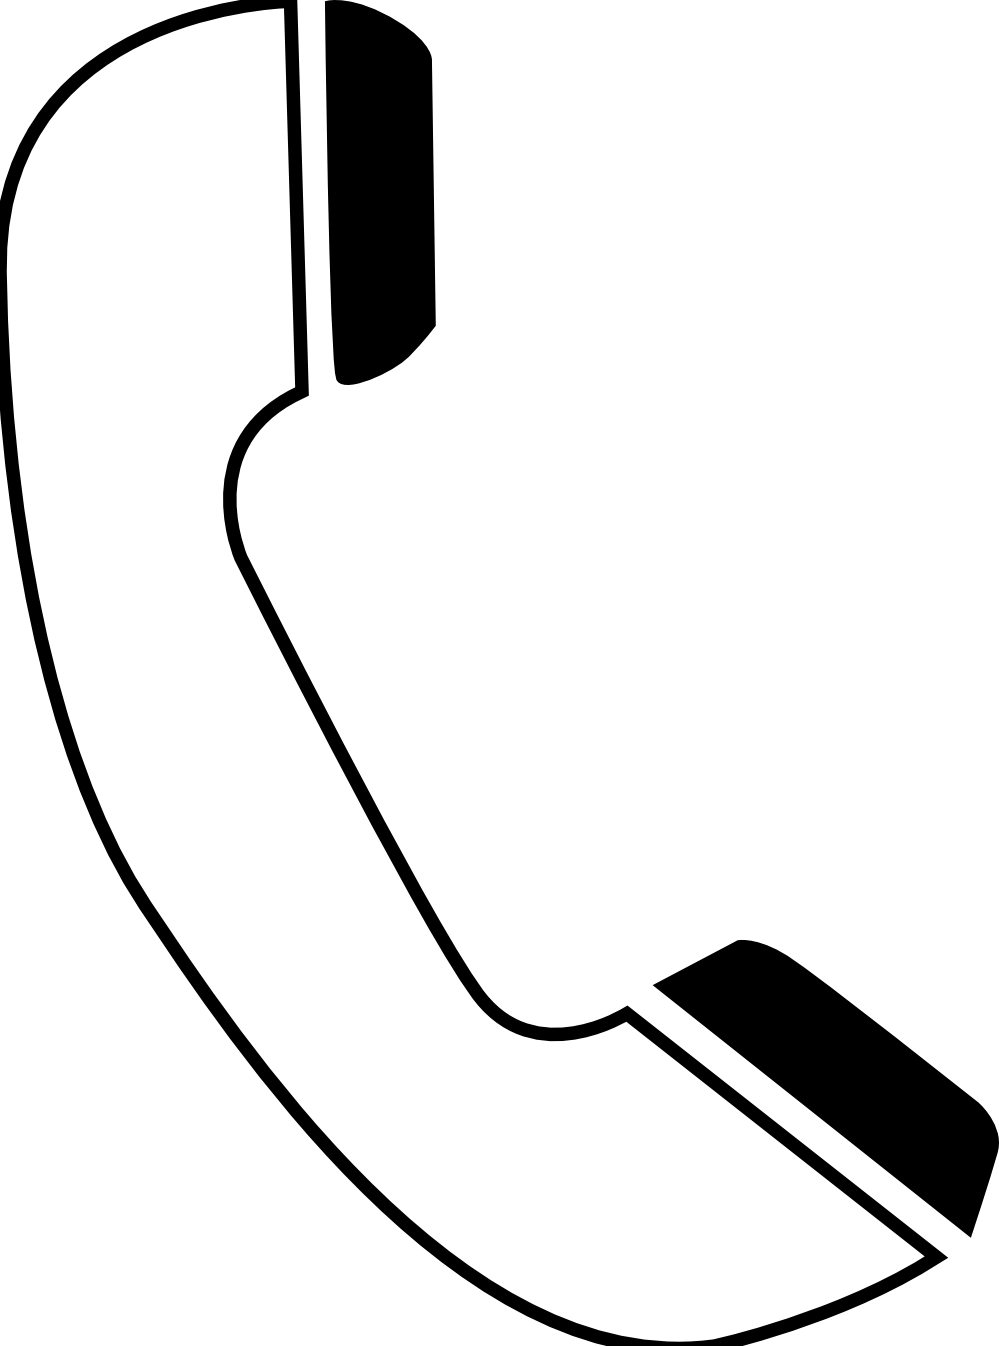 Telephone clipart black and white, Telephone black and white